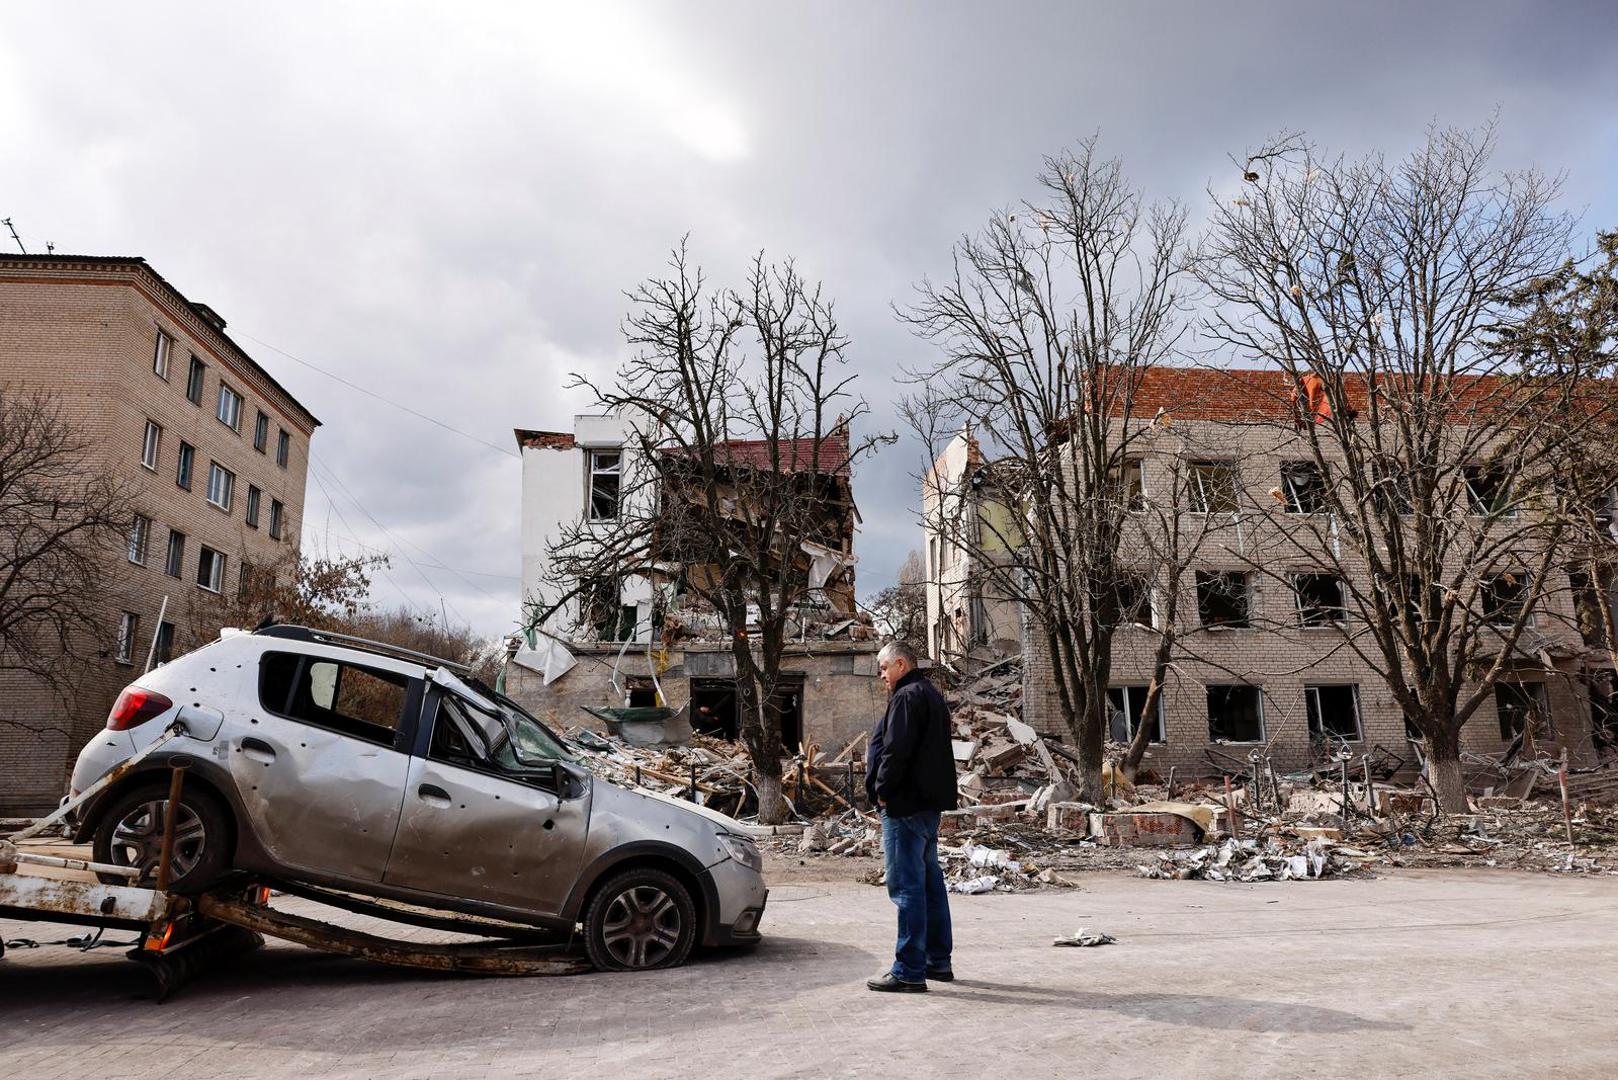 A man looks at a damaged vehicle in the aftermath of deadly shelling of an army office building, amid Russia's attack, in Sloviansk, Ukraine, March 27, 2023. REUTERS/Violeta Santos Moura Photo: VIOLETA SANTOS MOURA/REUTERS